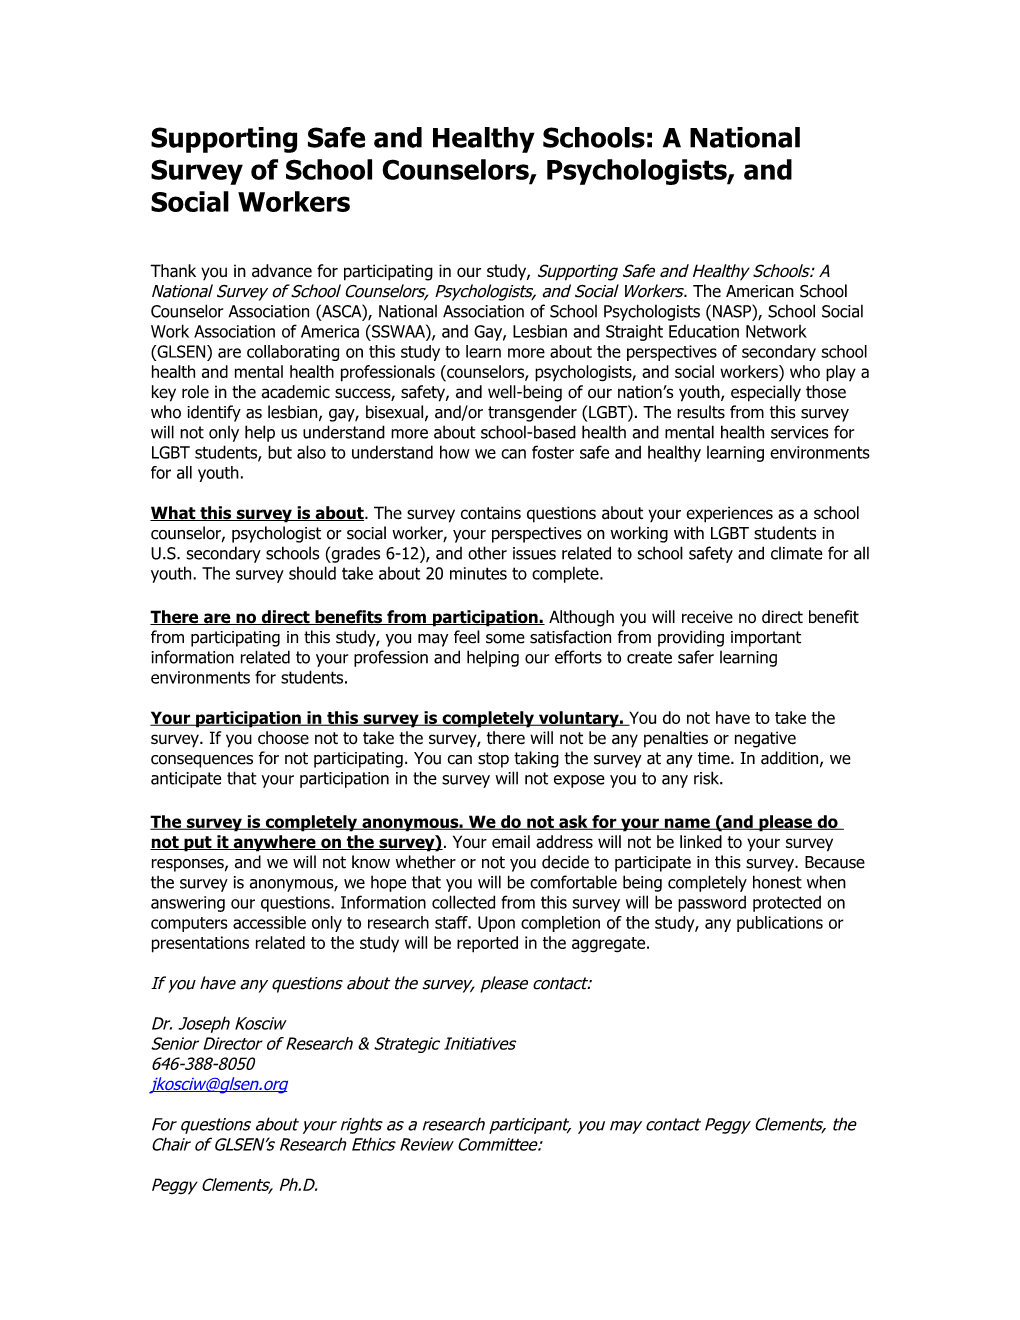 Supporting Safe and Healthy Schools: a National Survey of School Counselors, Psychologists